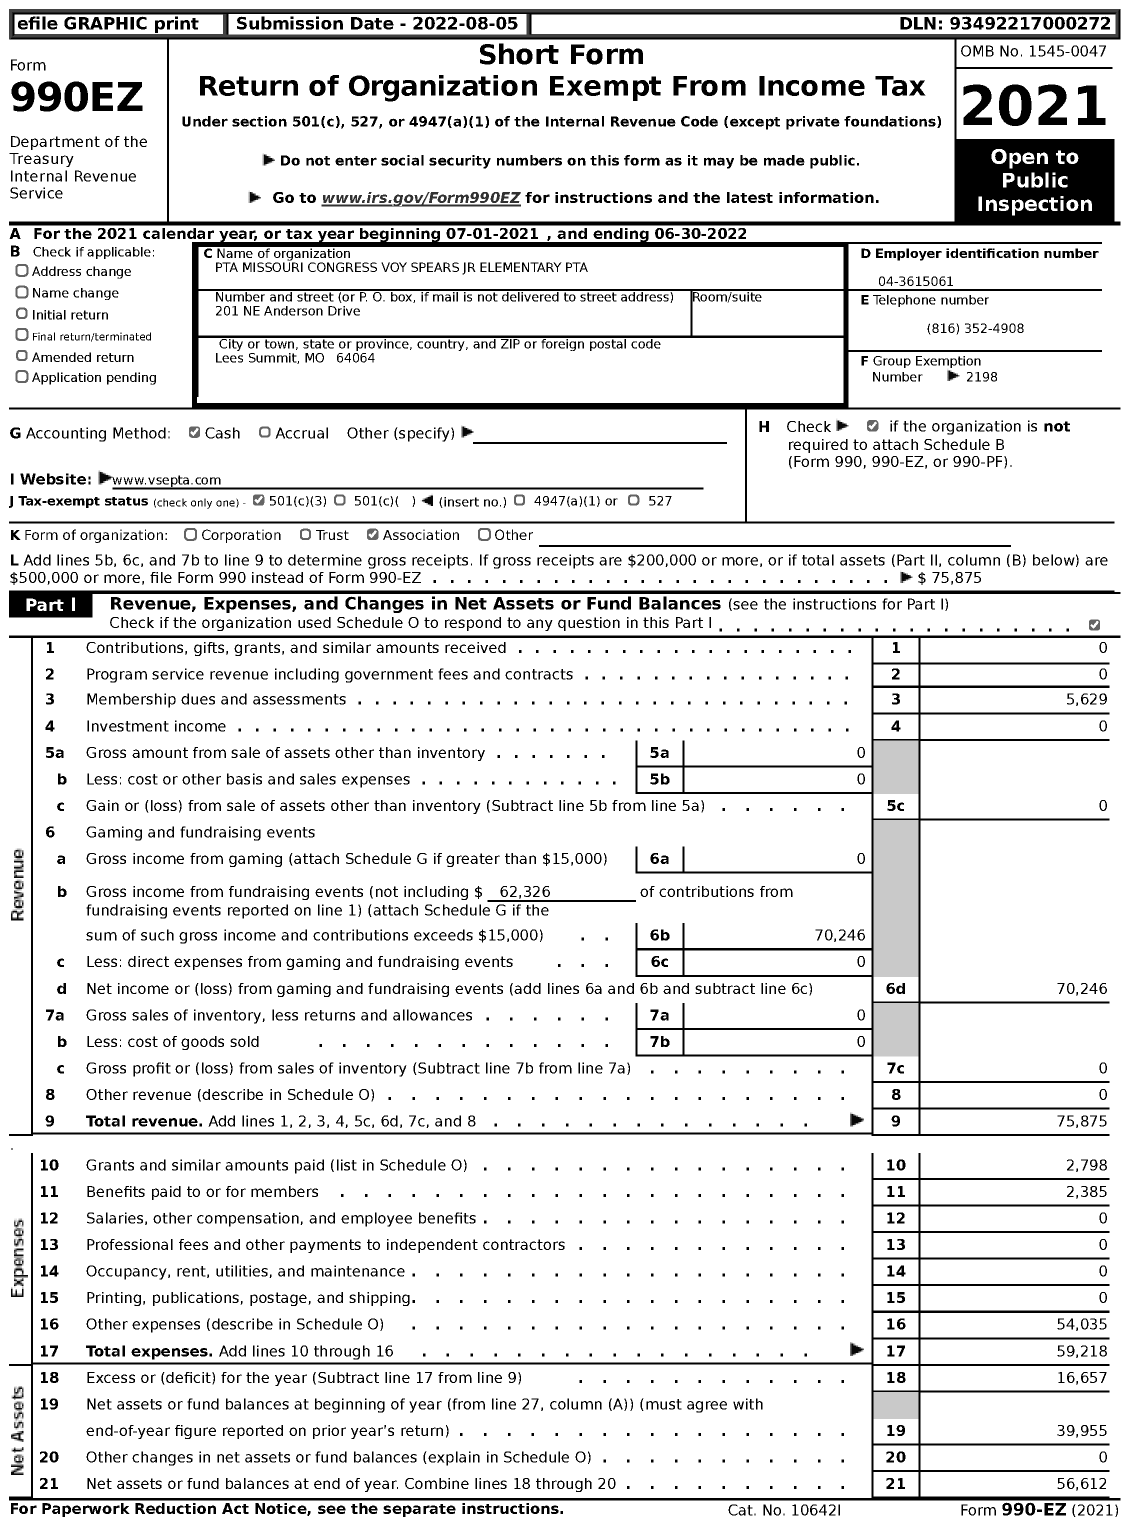 Image of first page of 2021 Form 990EZ for PTA Missouri Congress Voy Spears JR Elementary PTA